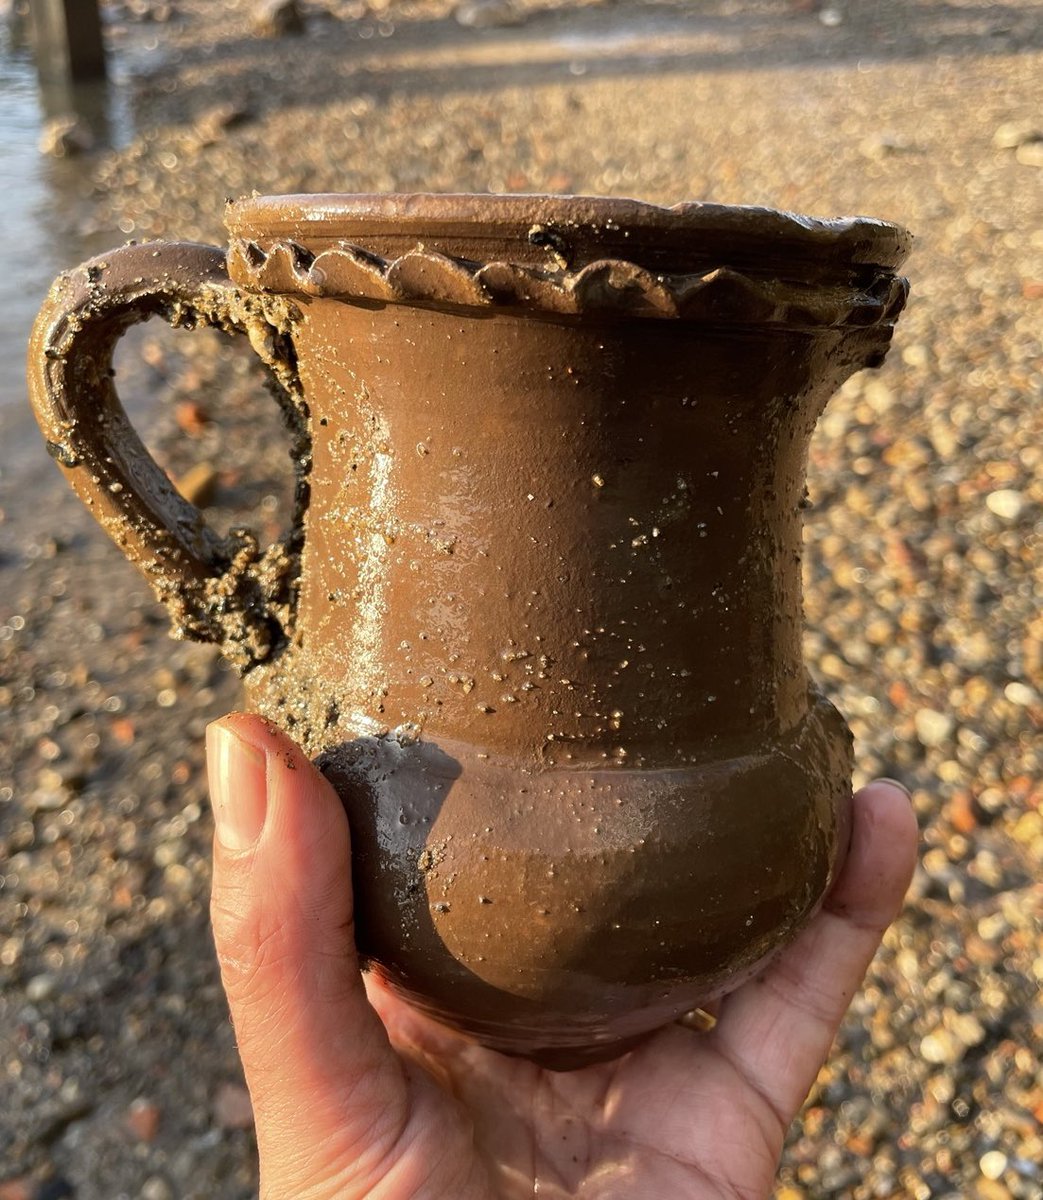 It’s only January, but this may well end up being my #mudlarking find of the year: a miraculously mostly complete Roman cup.  A less common form. Now having its contents x-rayed at the Museum of London. #mudlark #archaeology #romanbritain #history